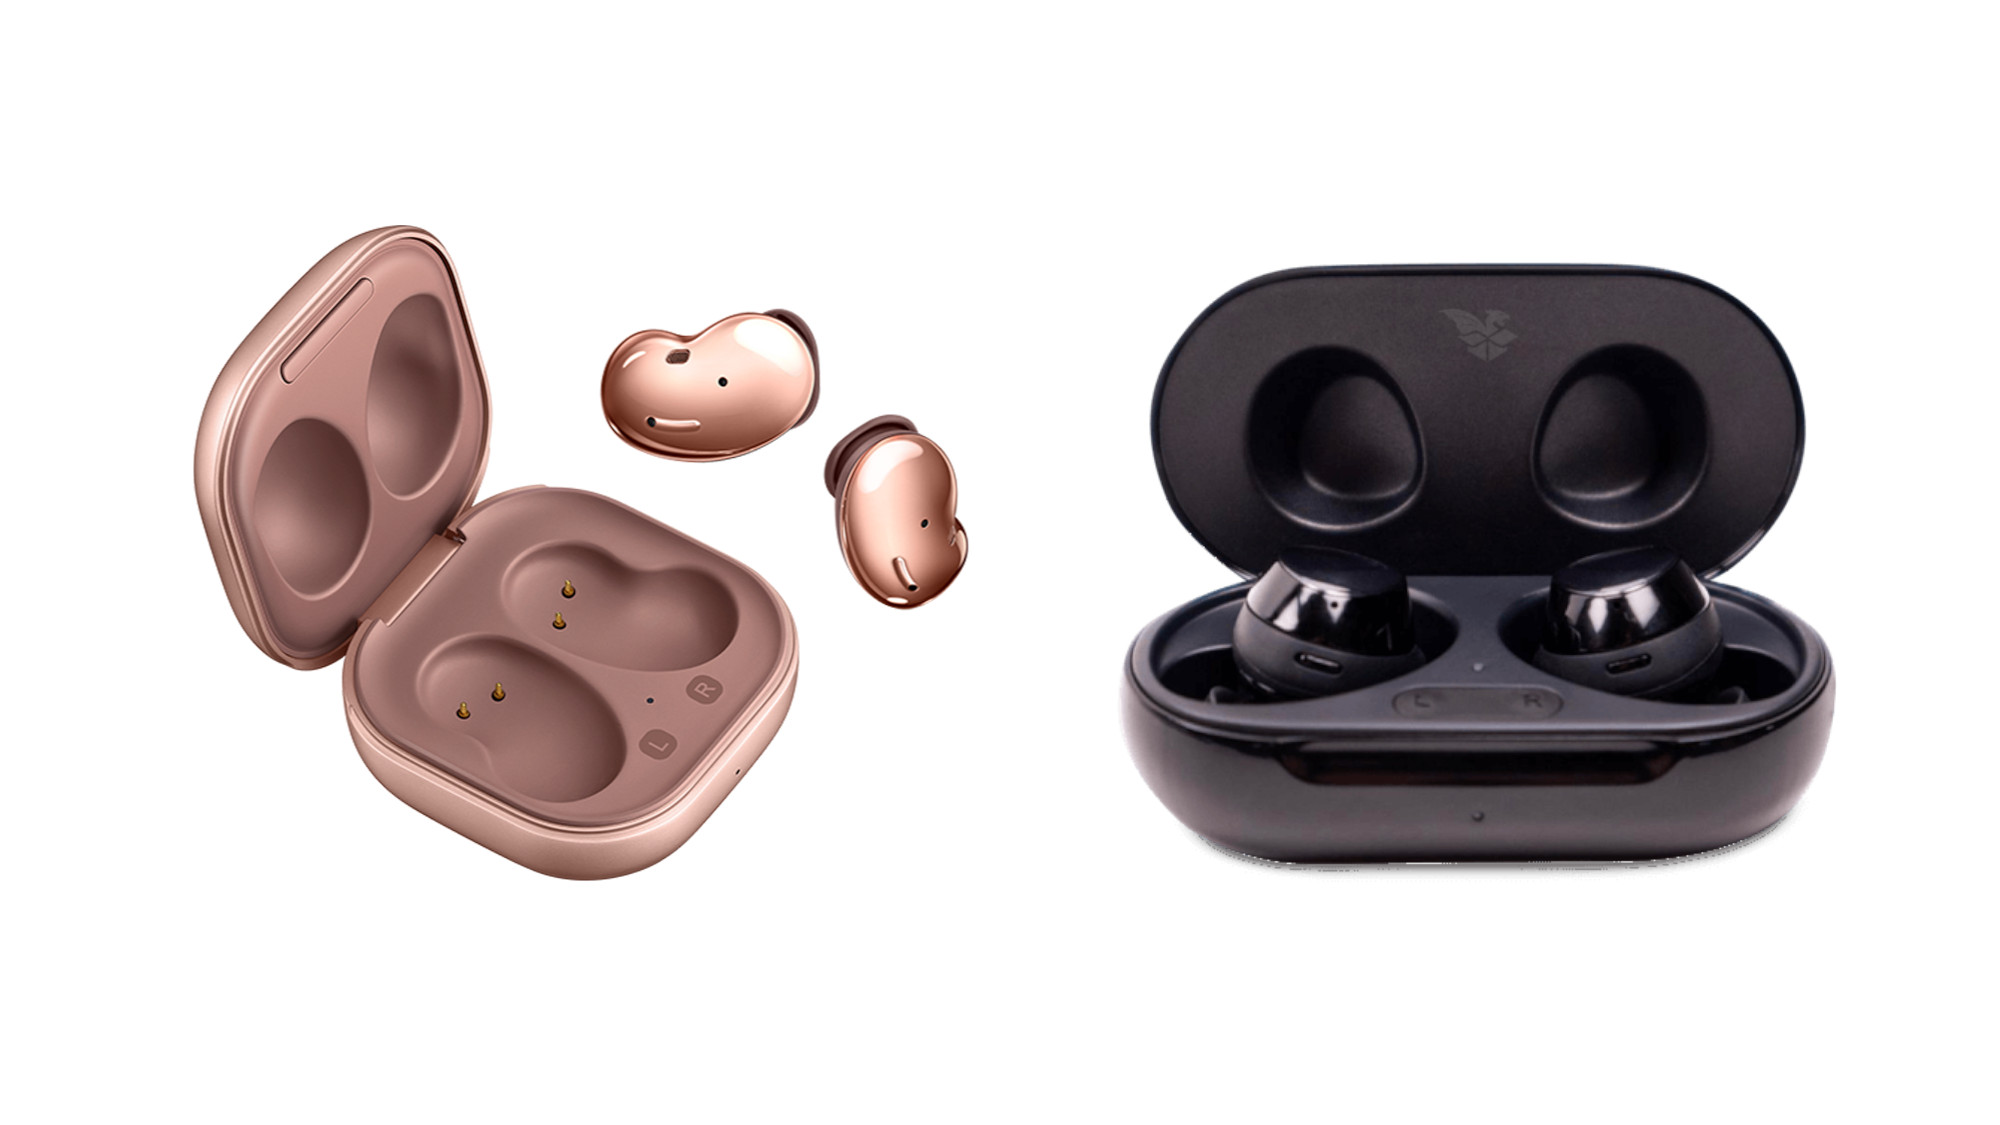 Samsung Galaxy buds selling prices